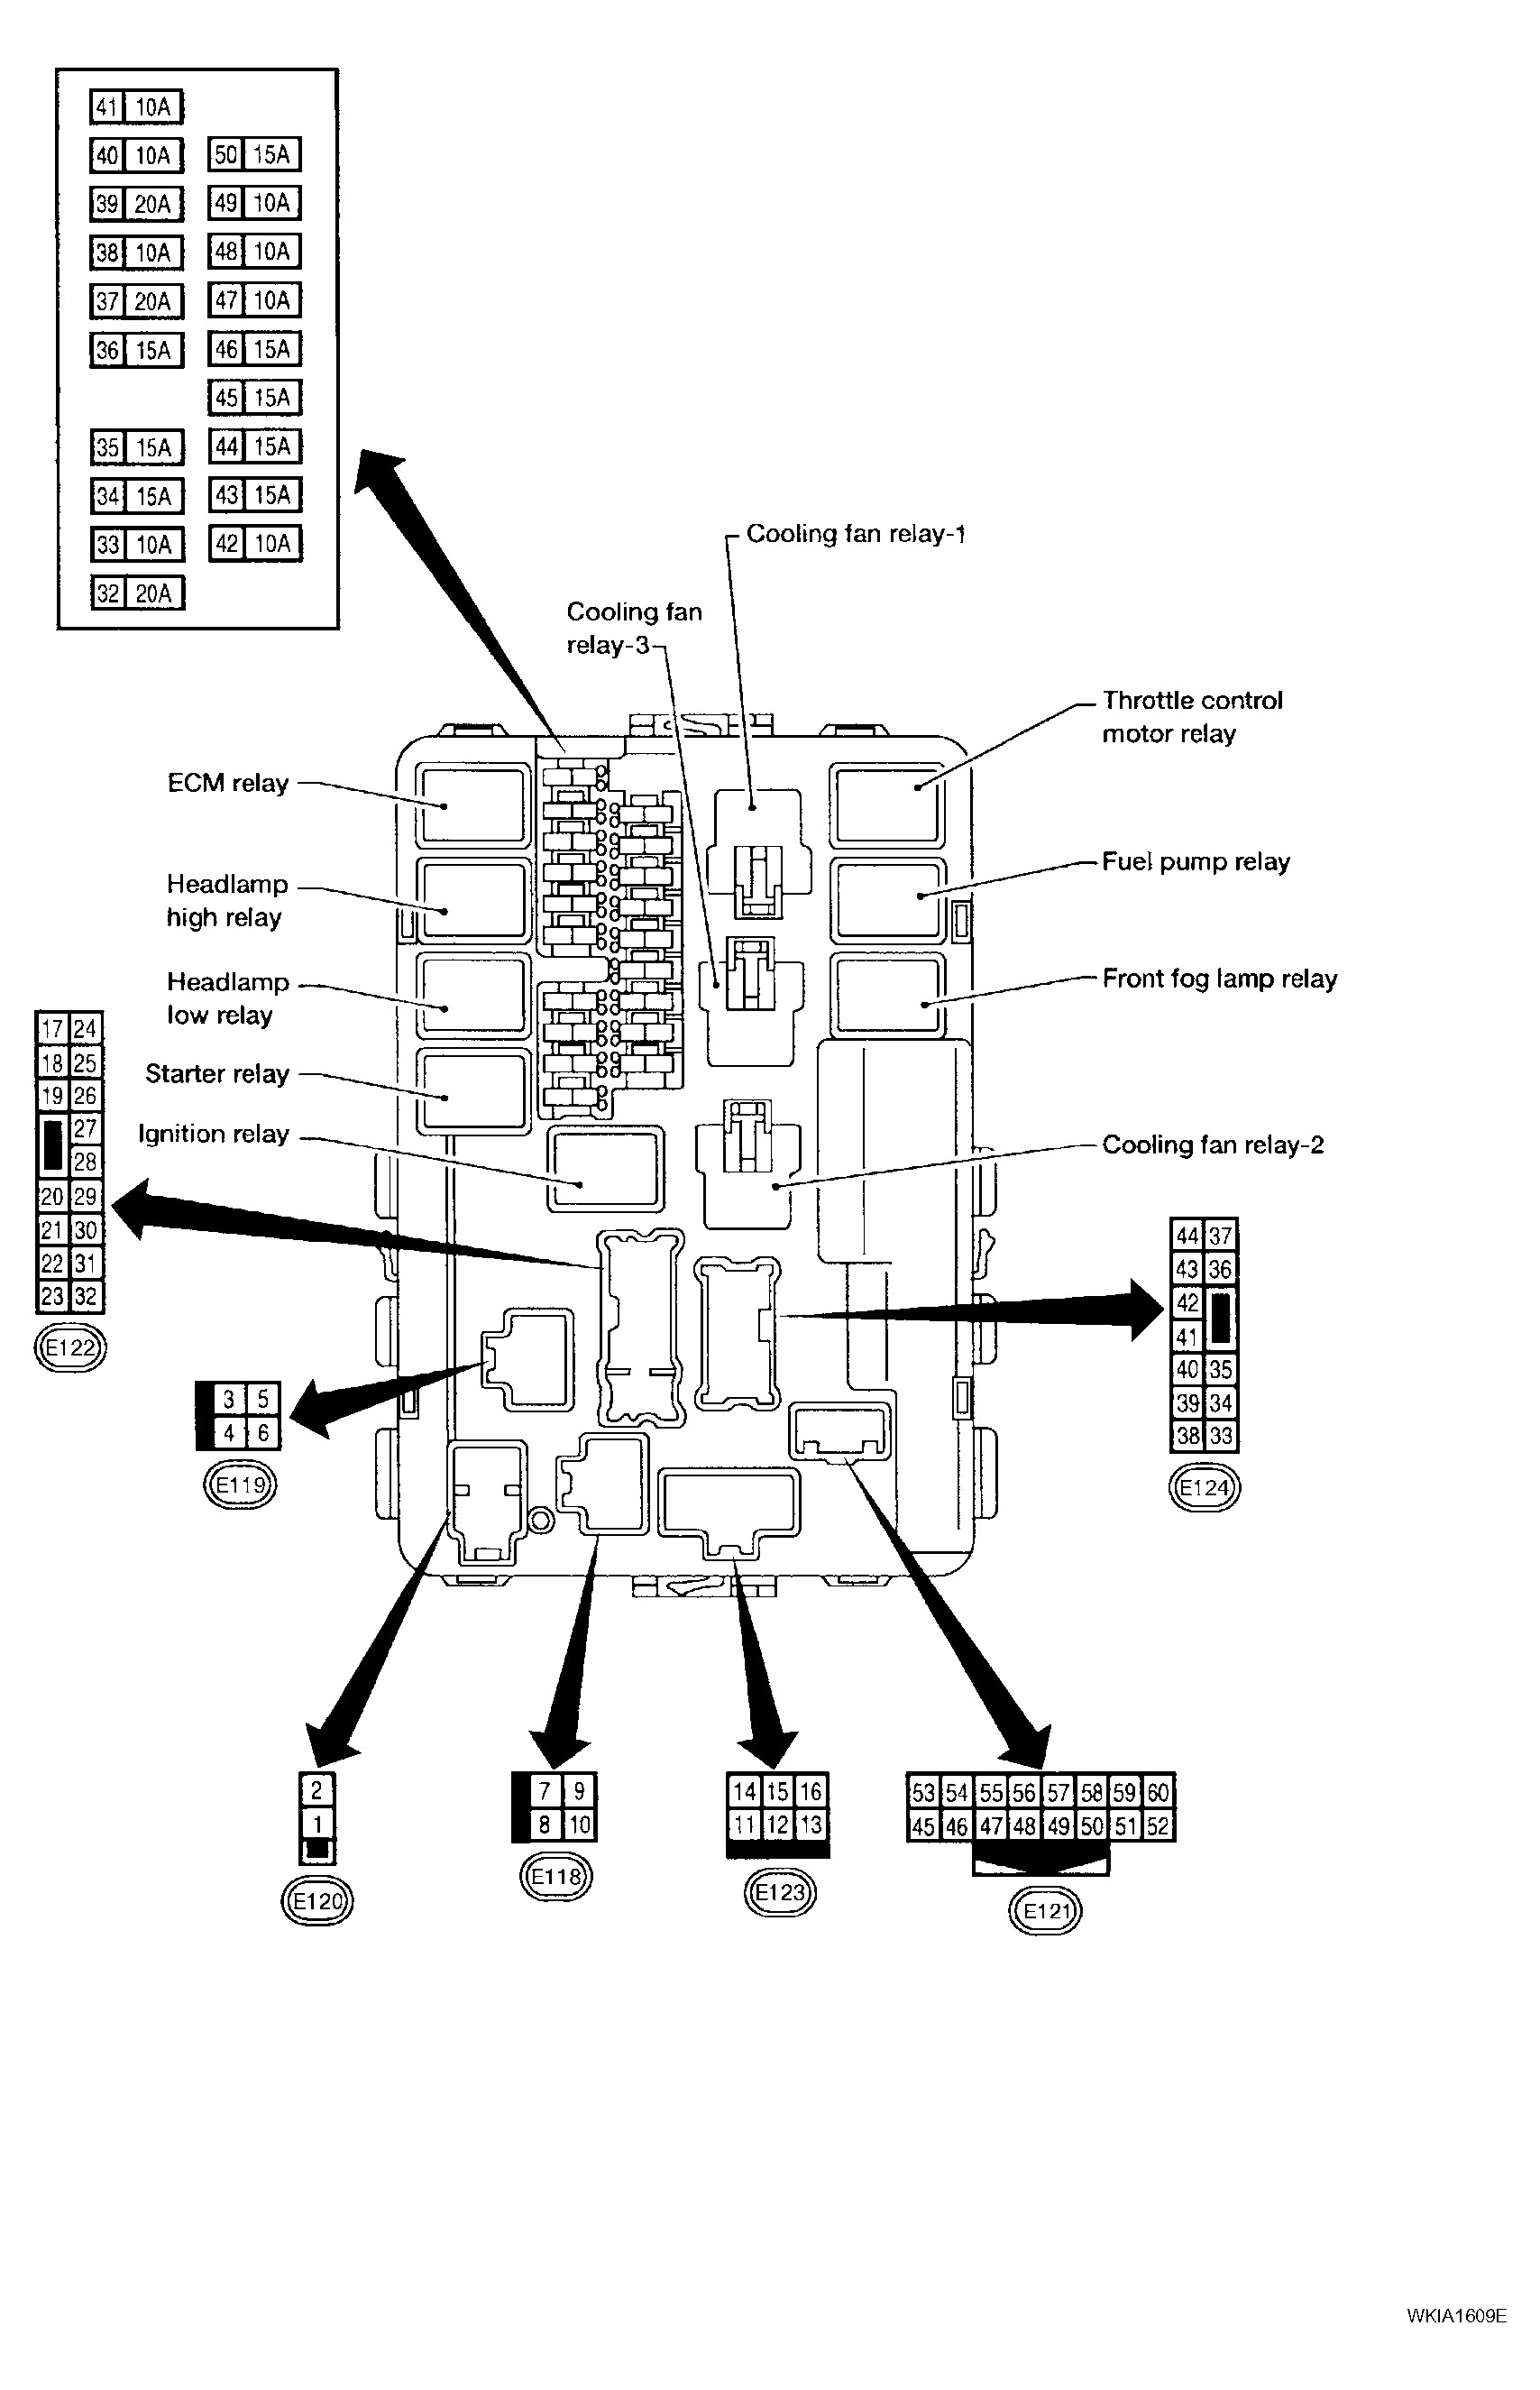 2004 Nissan Maxima Engine Diagram Take A Look About 2000 Nissan Maxima Engine with Awesome Gallery Of 2004 Nissan Maxima Engine Diagram